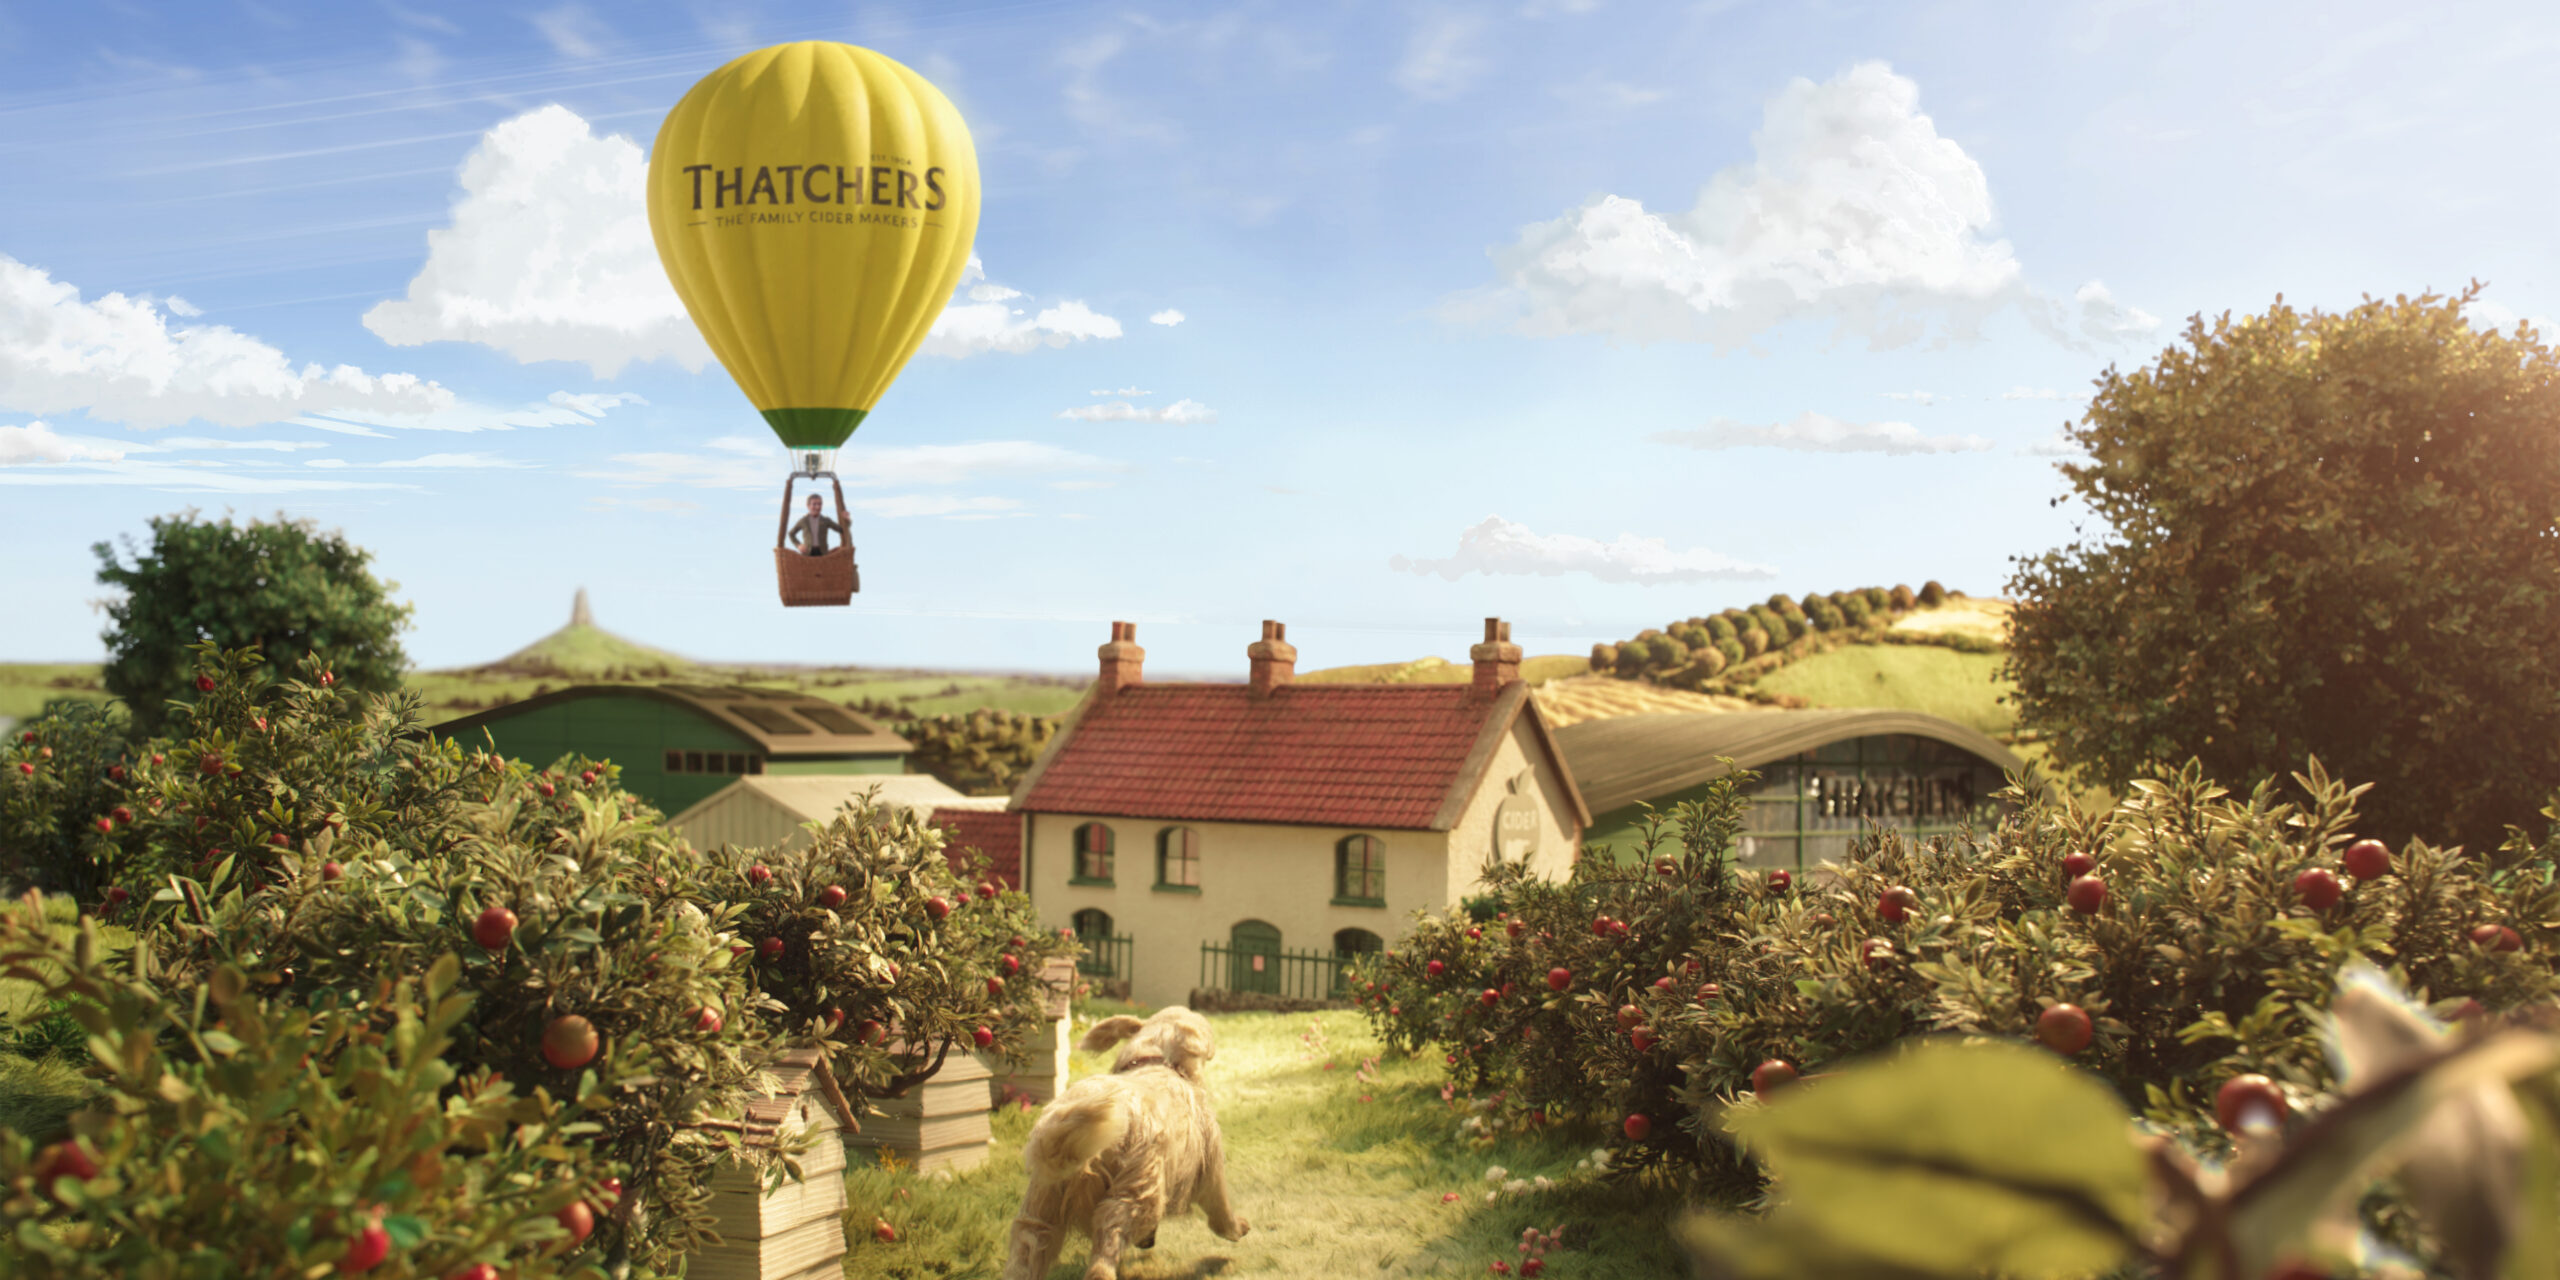 Thatchers x Aardman – the perfect West Country pairing